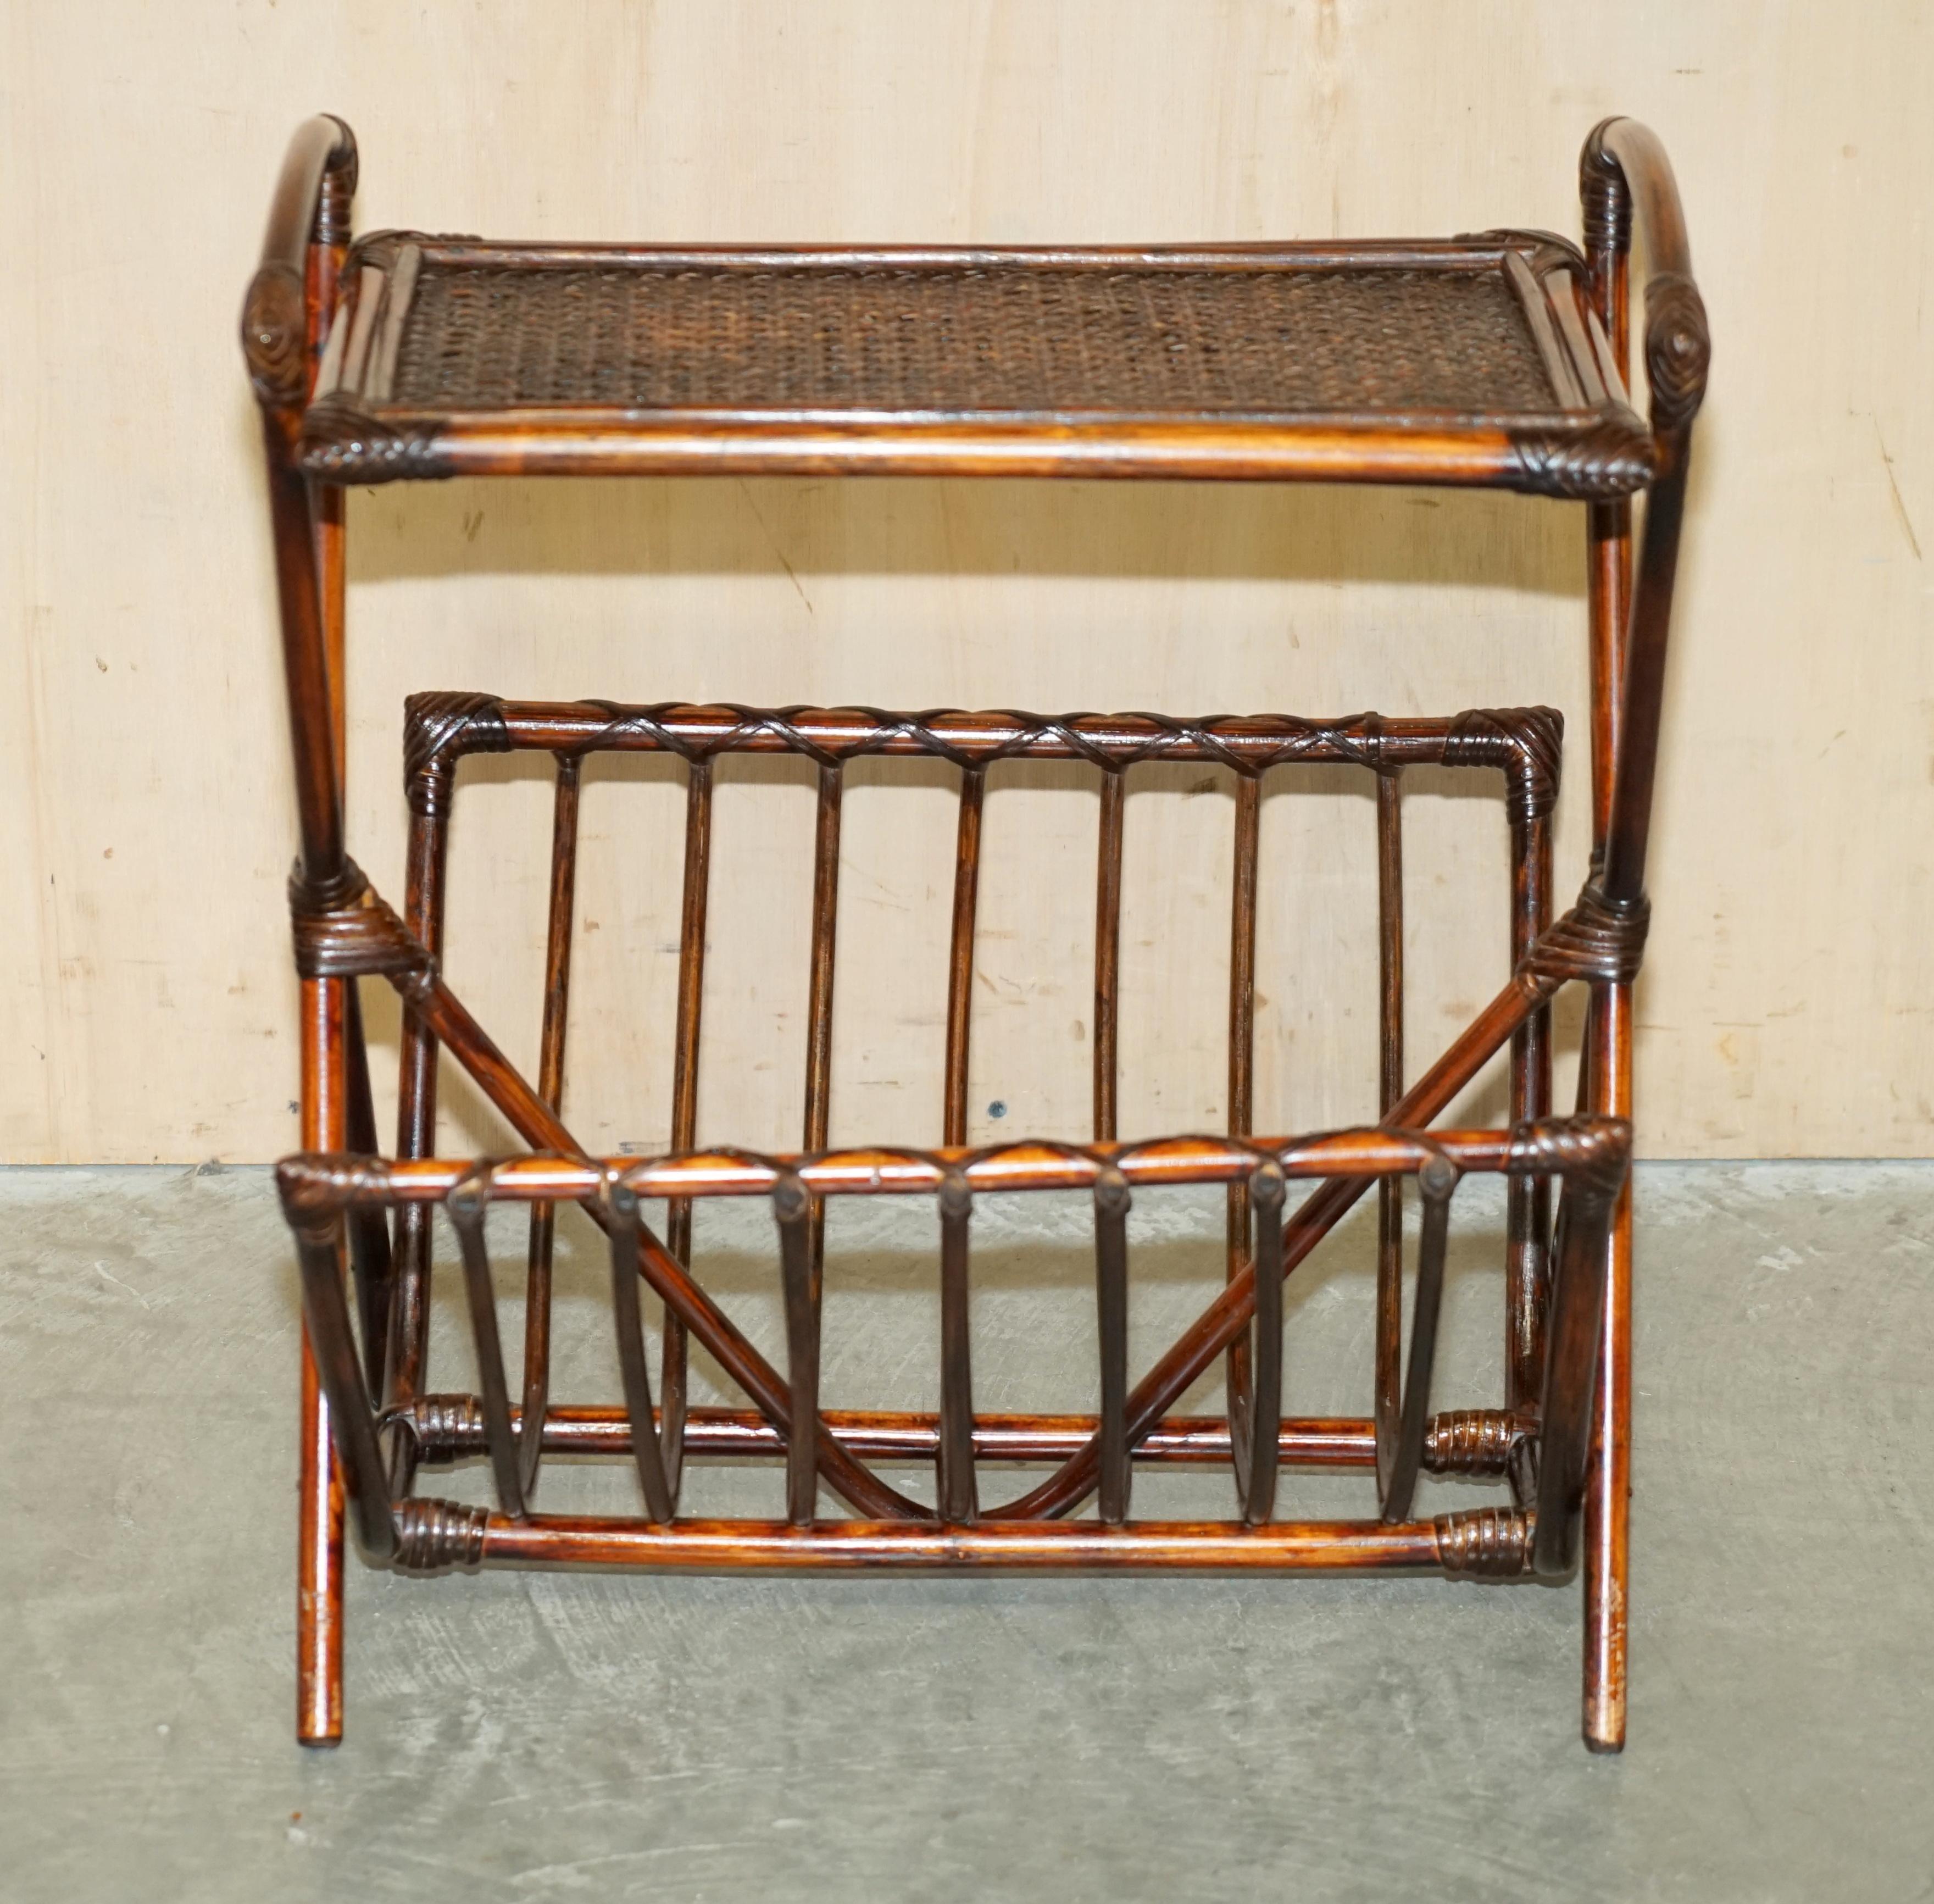 Royal House Antiques

Royal House Antiques is delighted to offer for sale this very fine, circa 1960's Mid Century Modern, Bentwood Bamboo & Bergere / rattan magazine rack 

Please note the delivery fee listed is just a guide, it covers within the